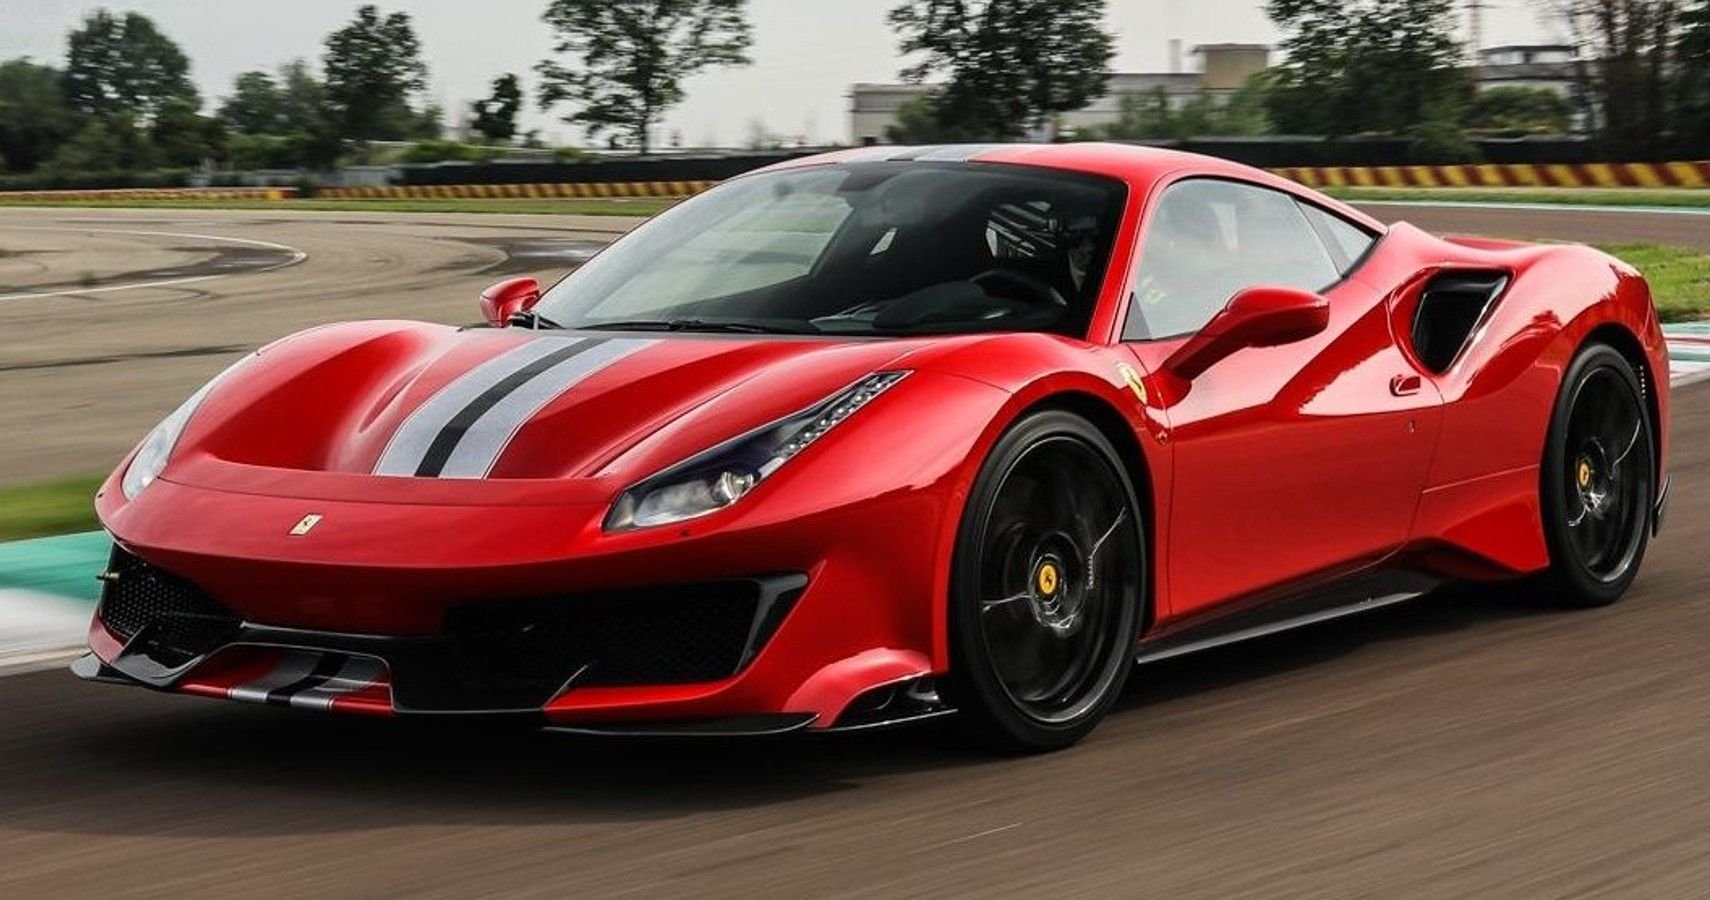 9 Reasons Why People Got Banned From Ever Buying A Ferrari Again